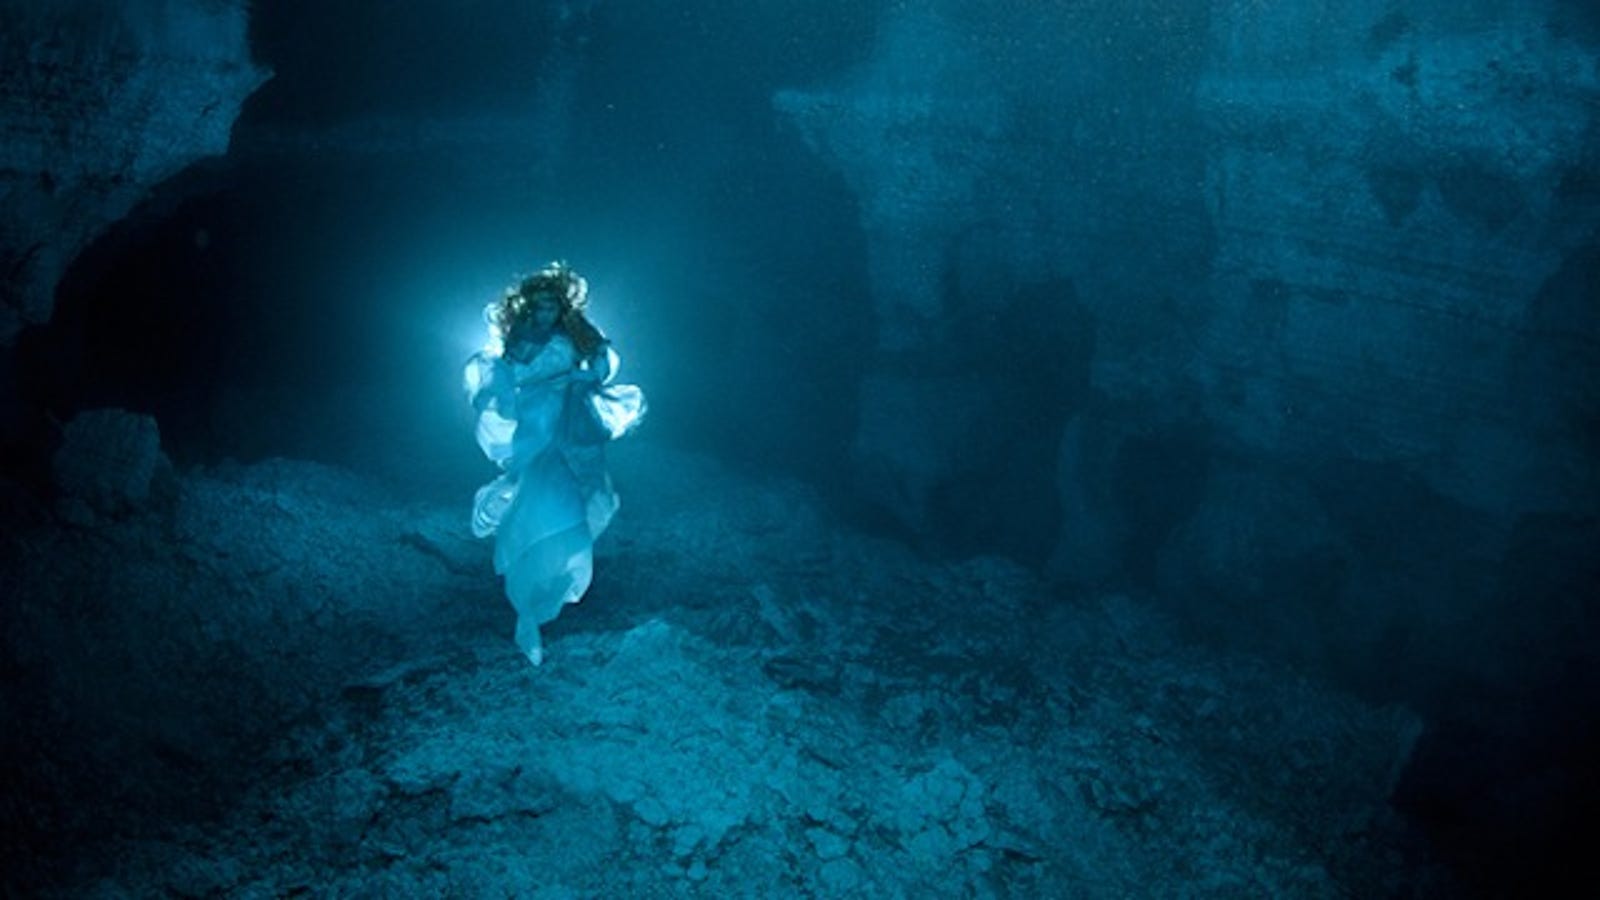 Ethereal Photos Of The Spirit That Haunts Russias Underwater Crystal Cave